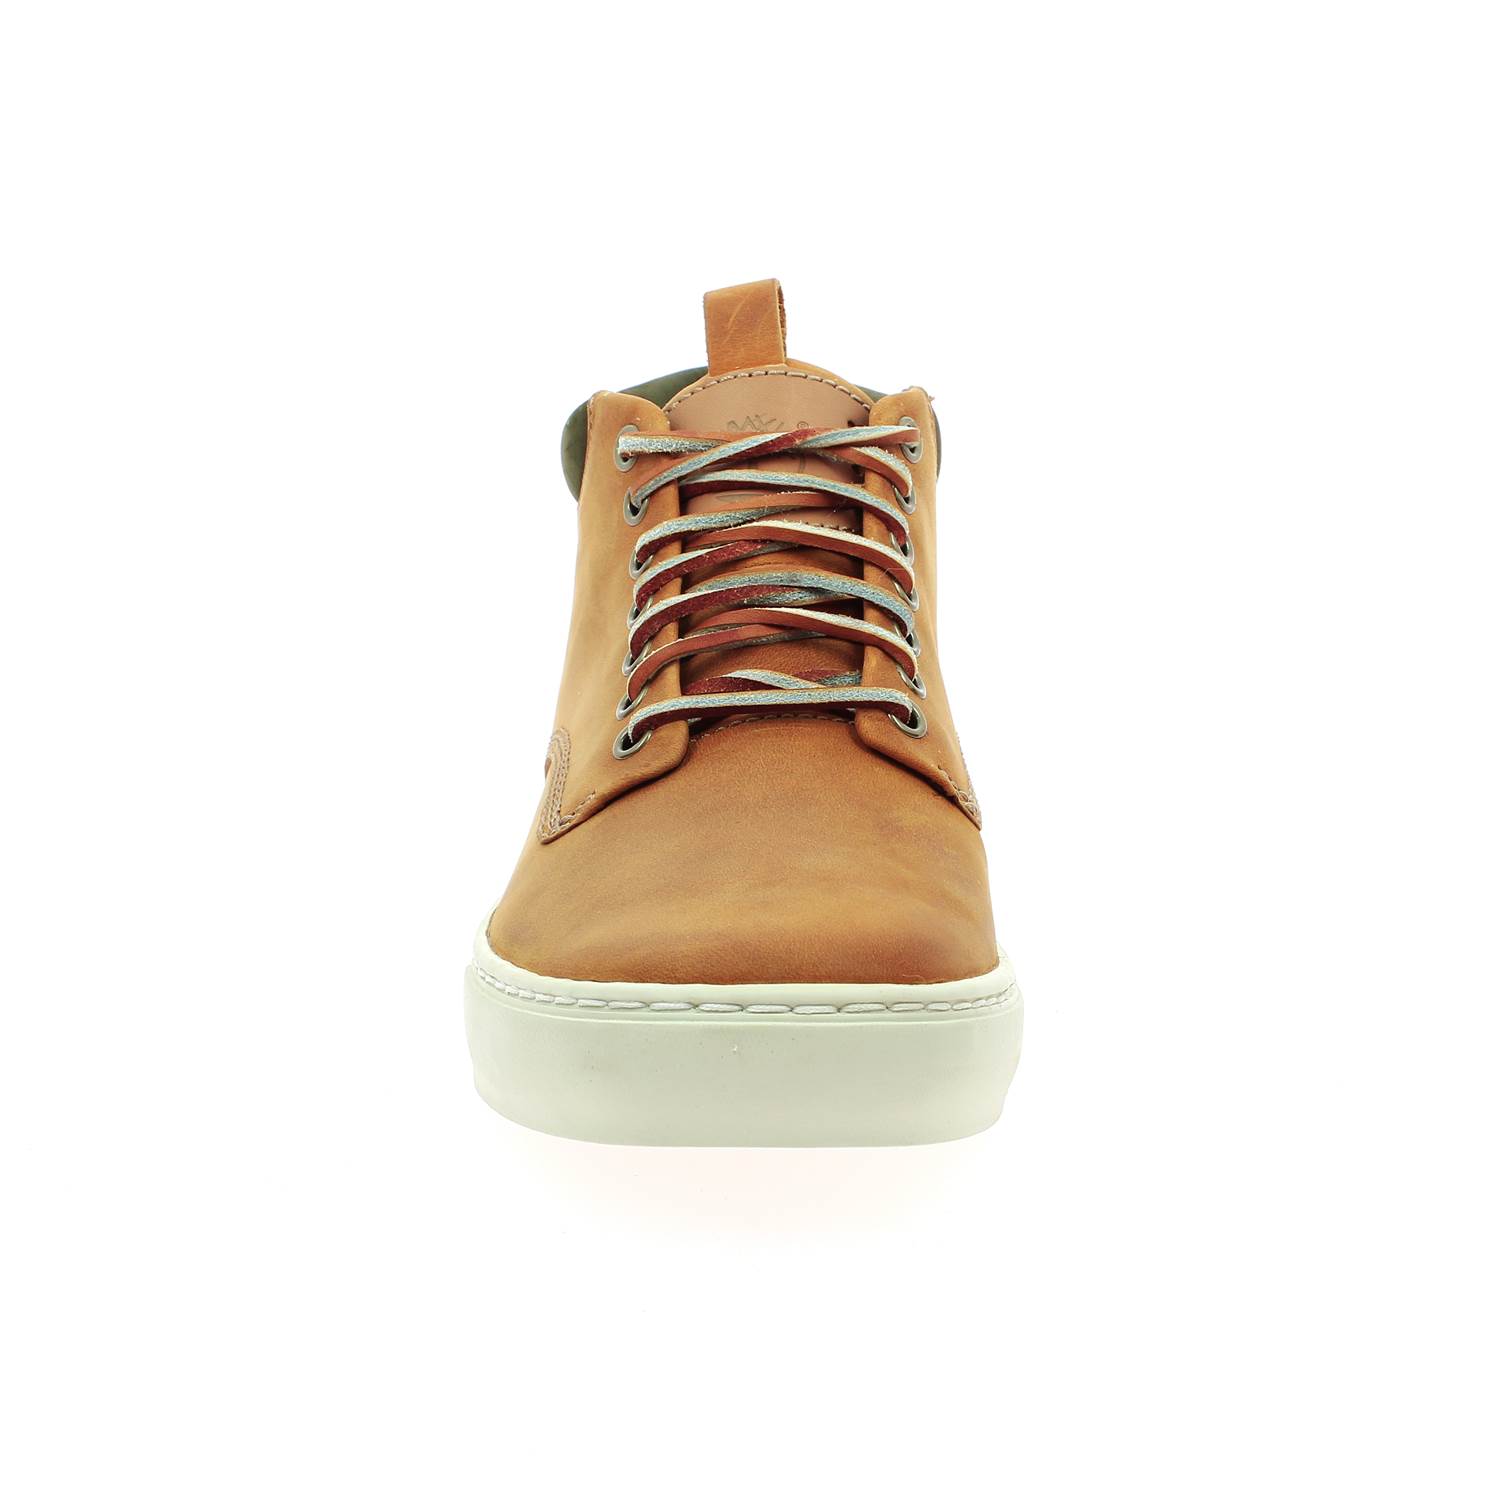 03 - CUPSOLE - TIMBERLAND - Boots et bottines - Cuir